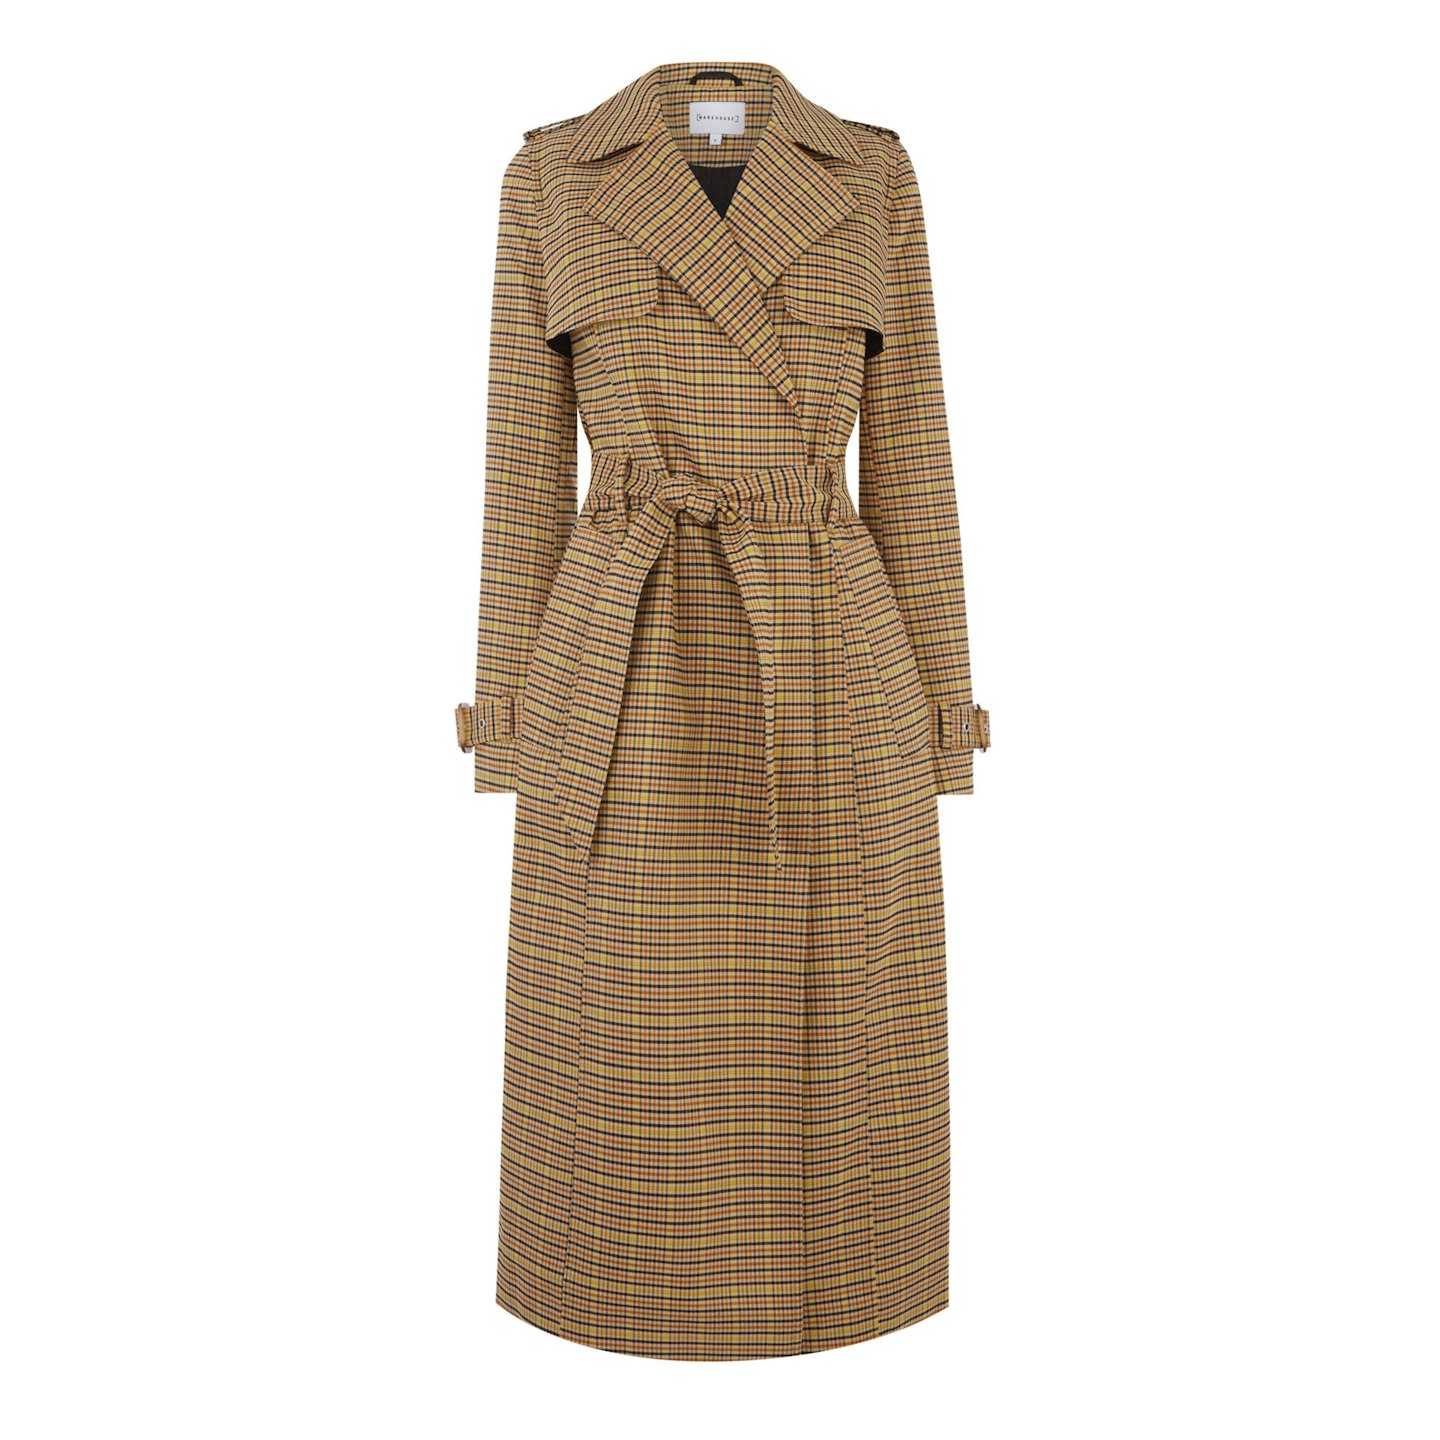 Warehouse, Clean Check Trench Coat, £89